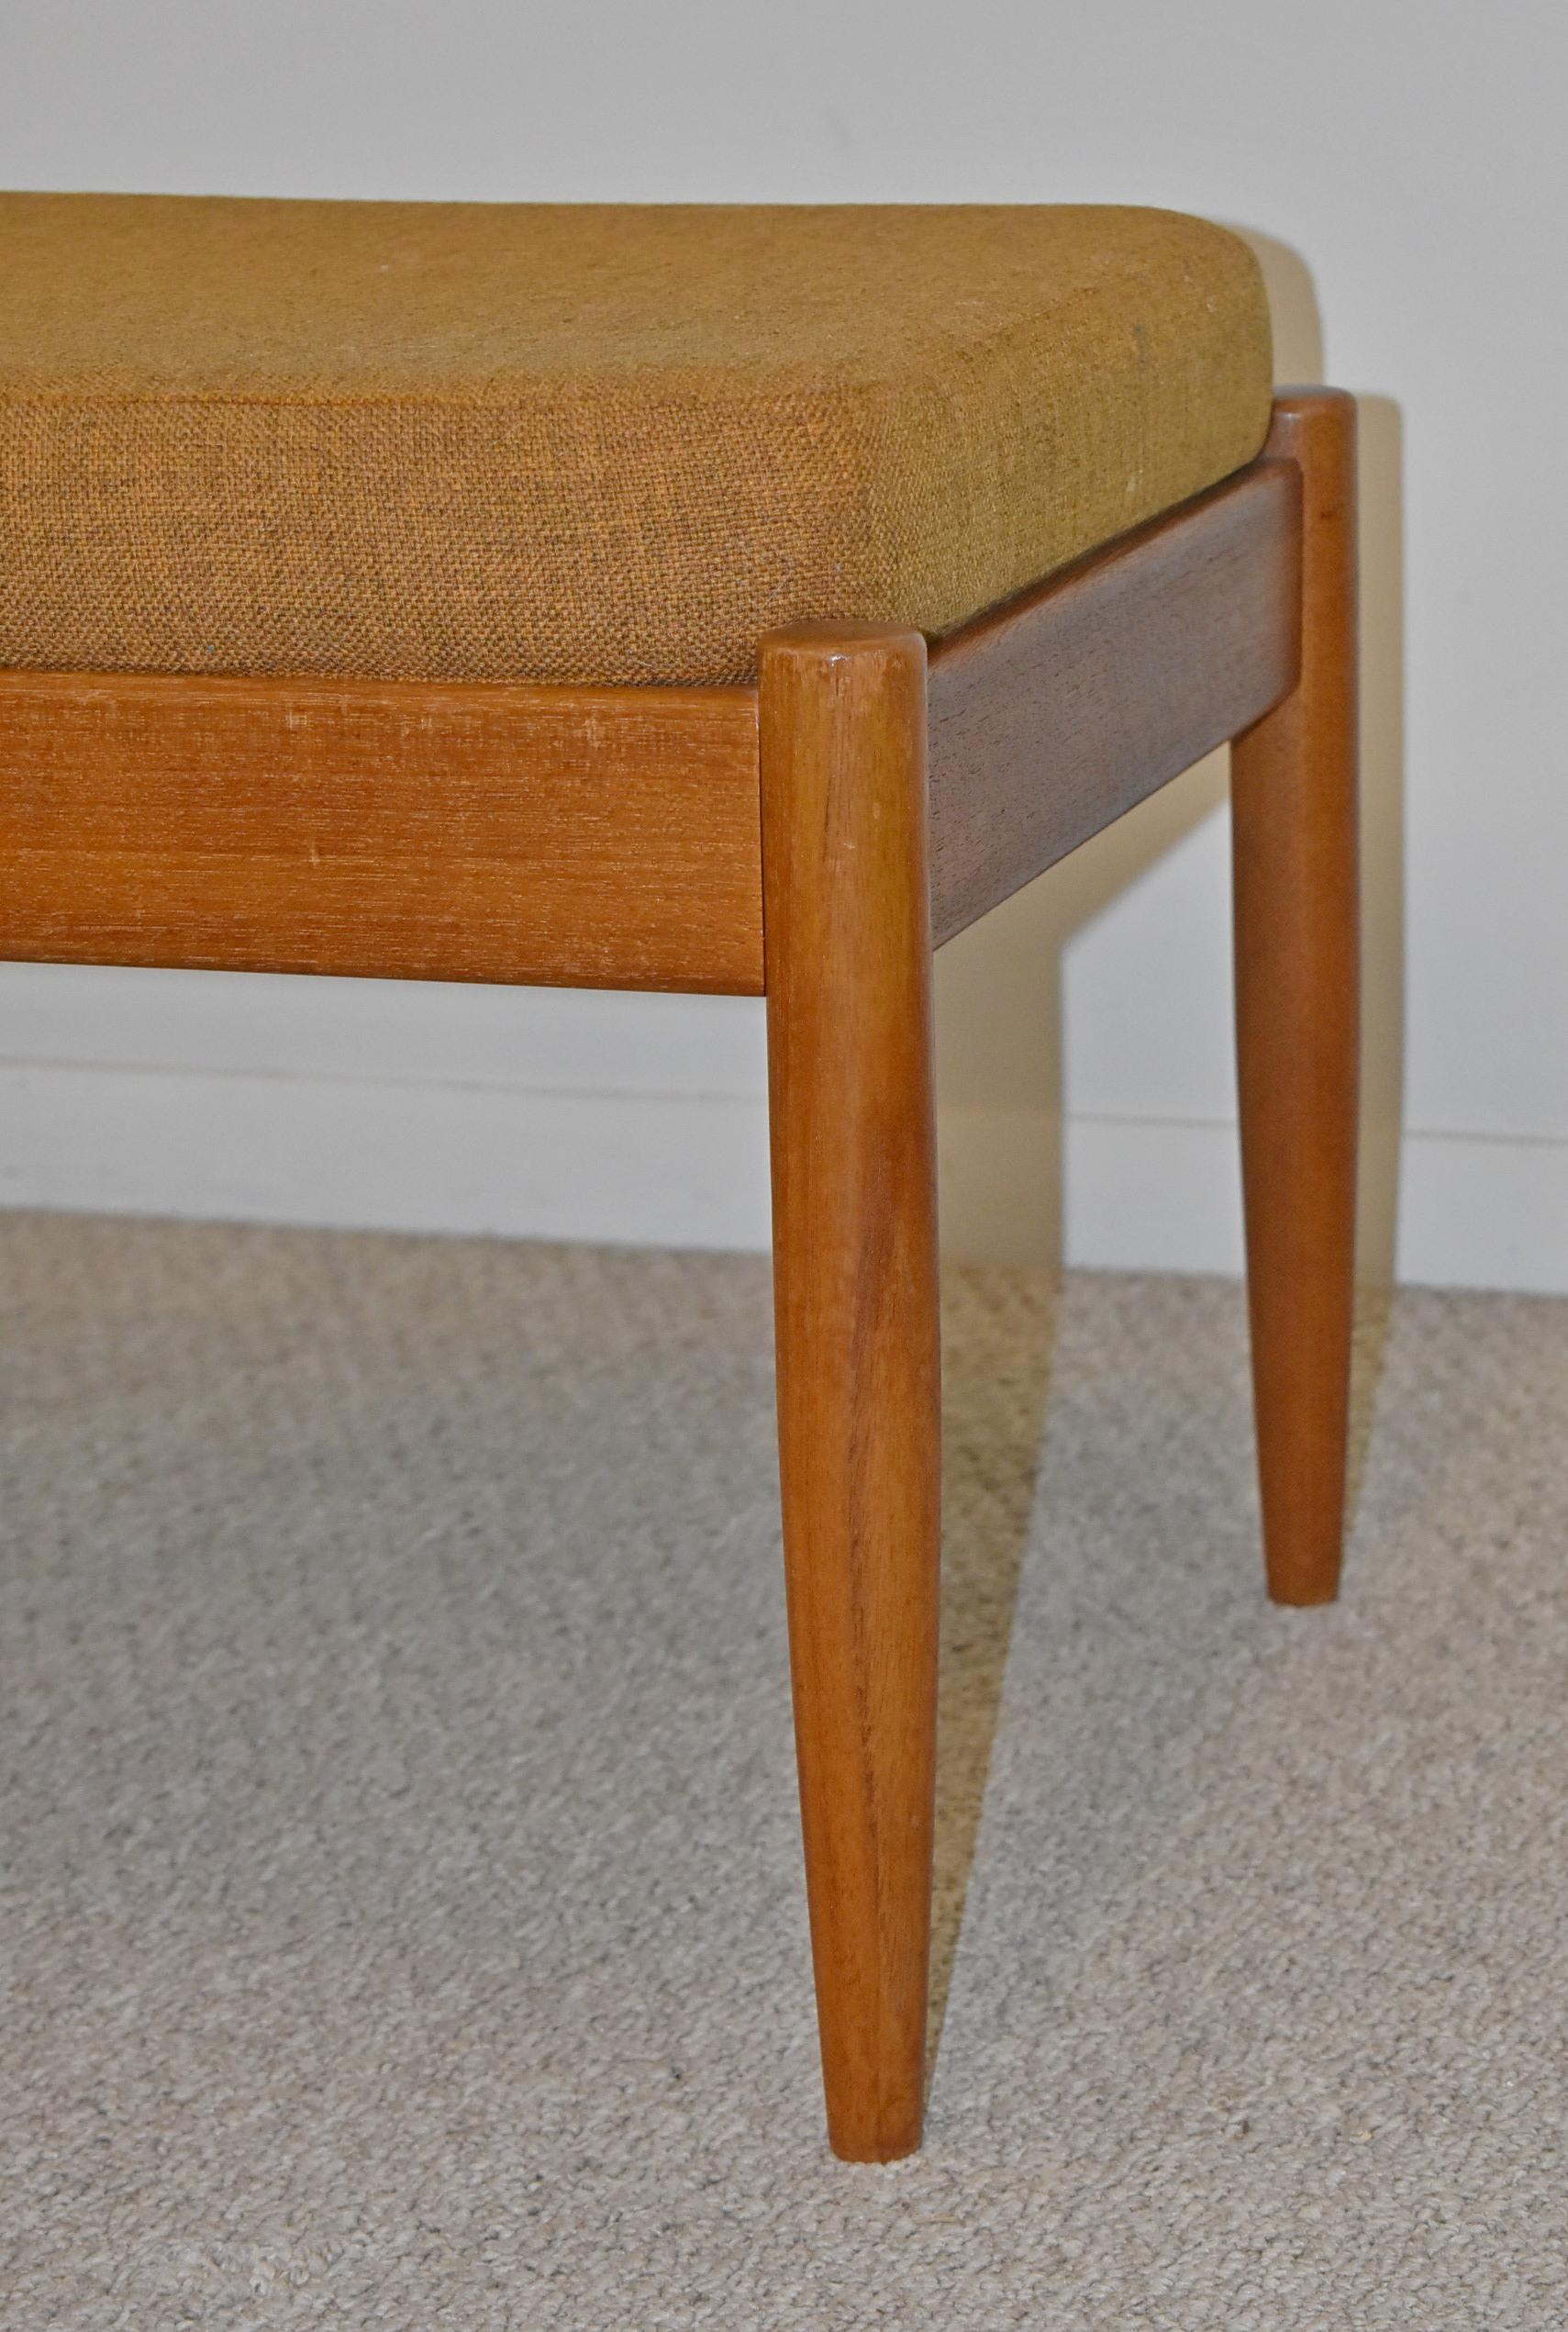 Danish Teak Foot Stool by Povl Dinesen In Good Condition For Sale In Toledo, OH